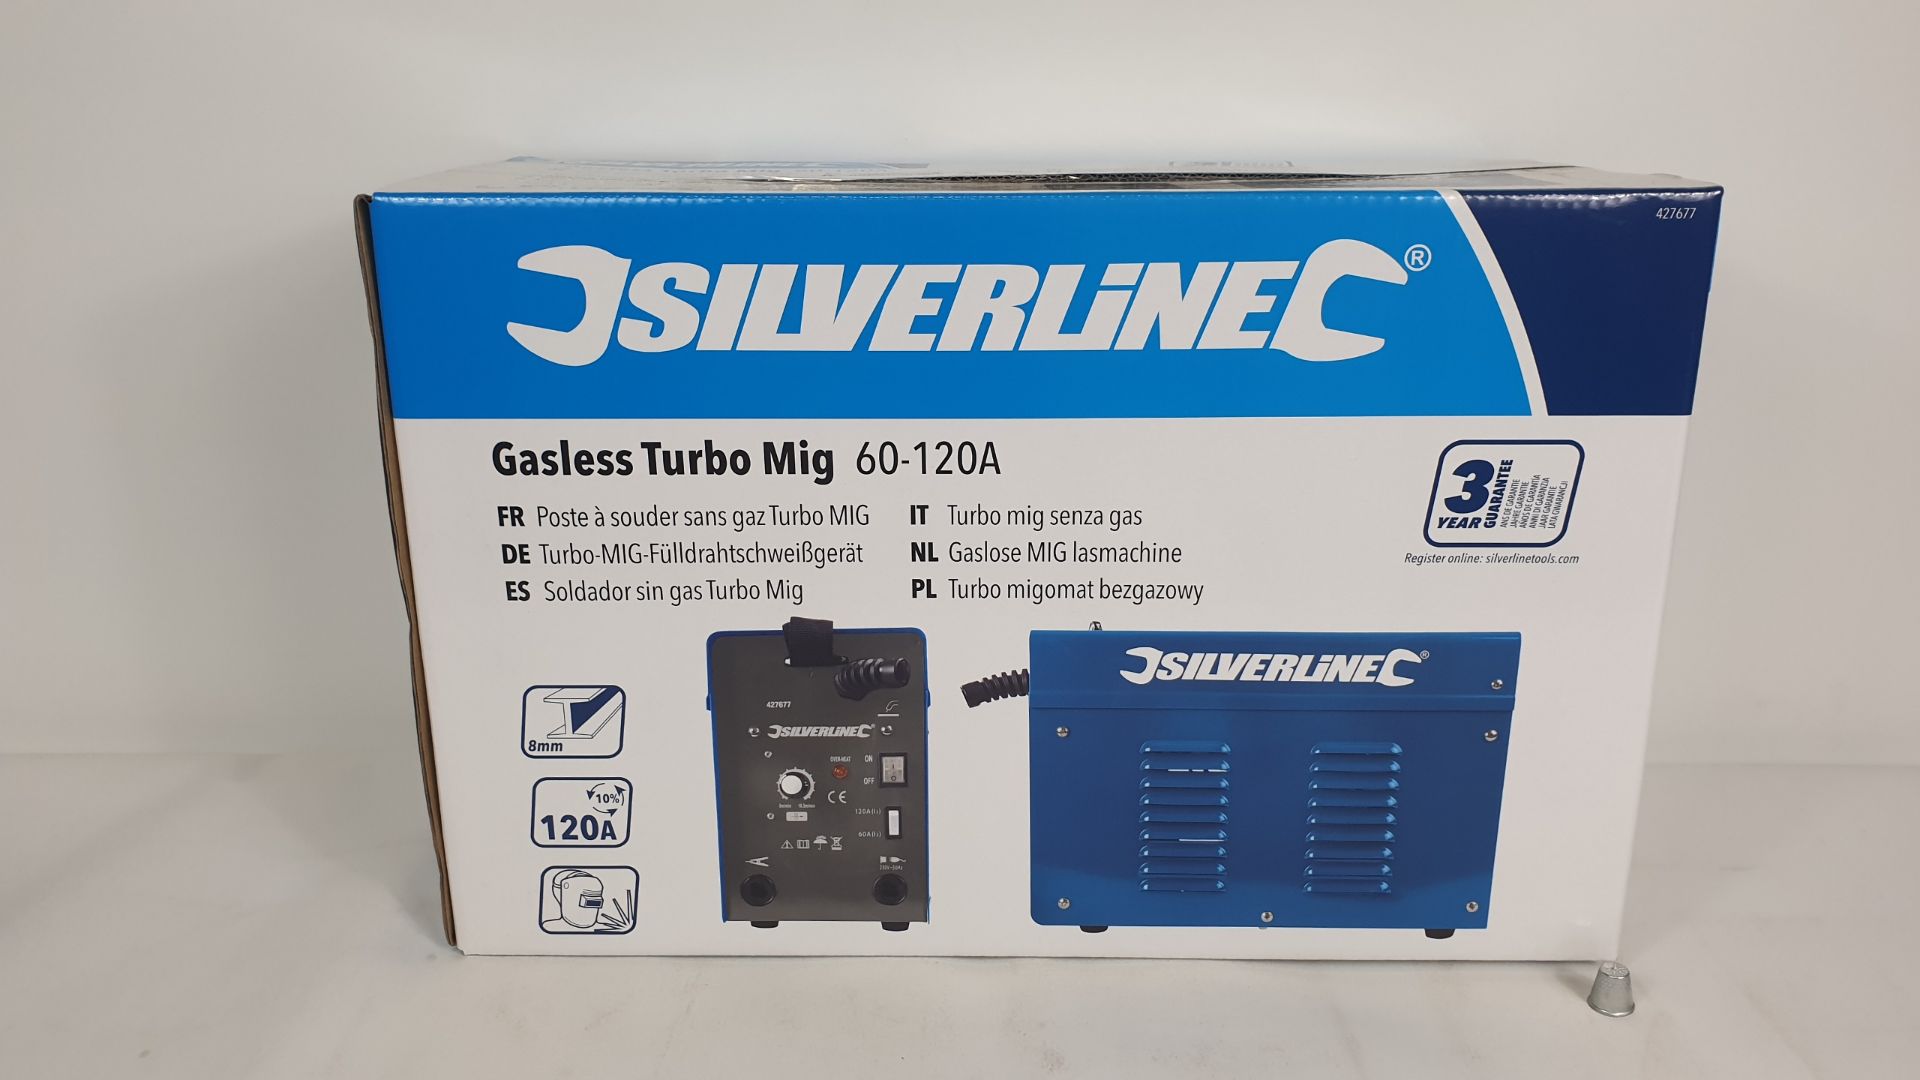 BRAND NEW BOXED SILVERLINE GASLESS TURBO MIG WELDING SET 60-120A (PRODUCT CODE 427677). COMPRISING